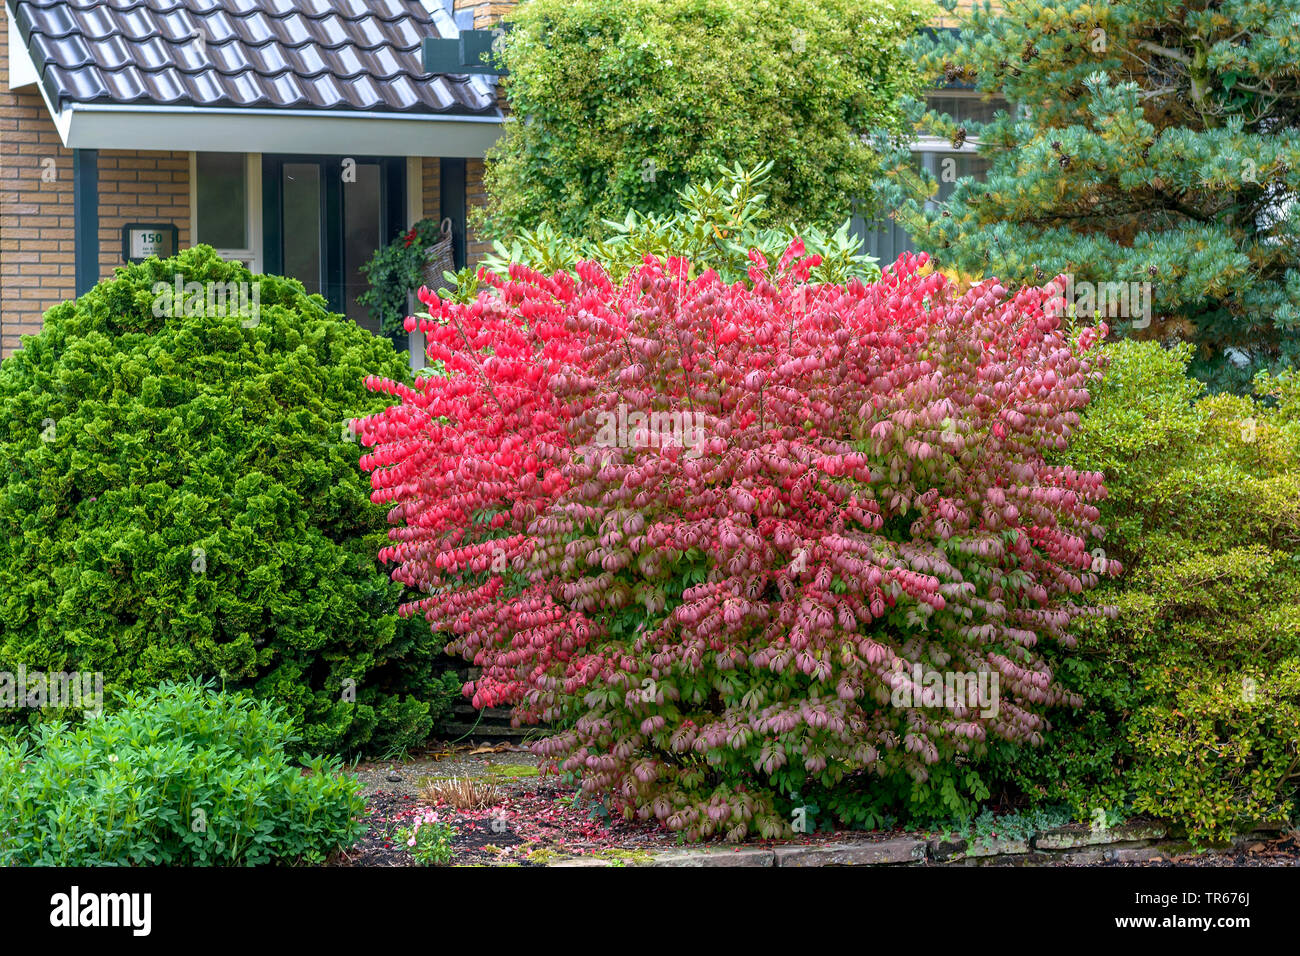 winged burning bush,wahoo, winged euonymus, winged spindle-tree (Euonymus alatus 'Compactus', Euonymus alatus Compactus, Euonymus alata, Euonymus alatus), cultivar Compactus in autumn Stock Photo